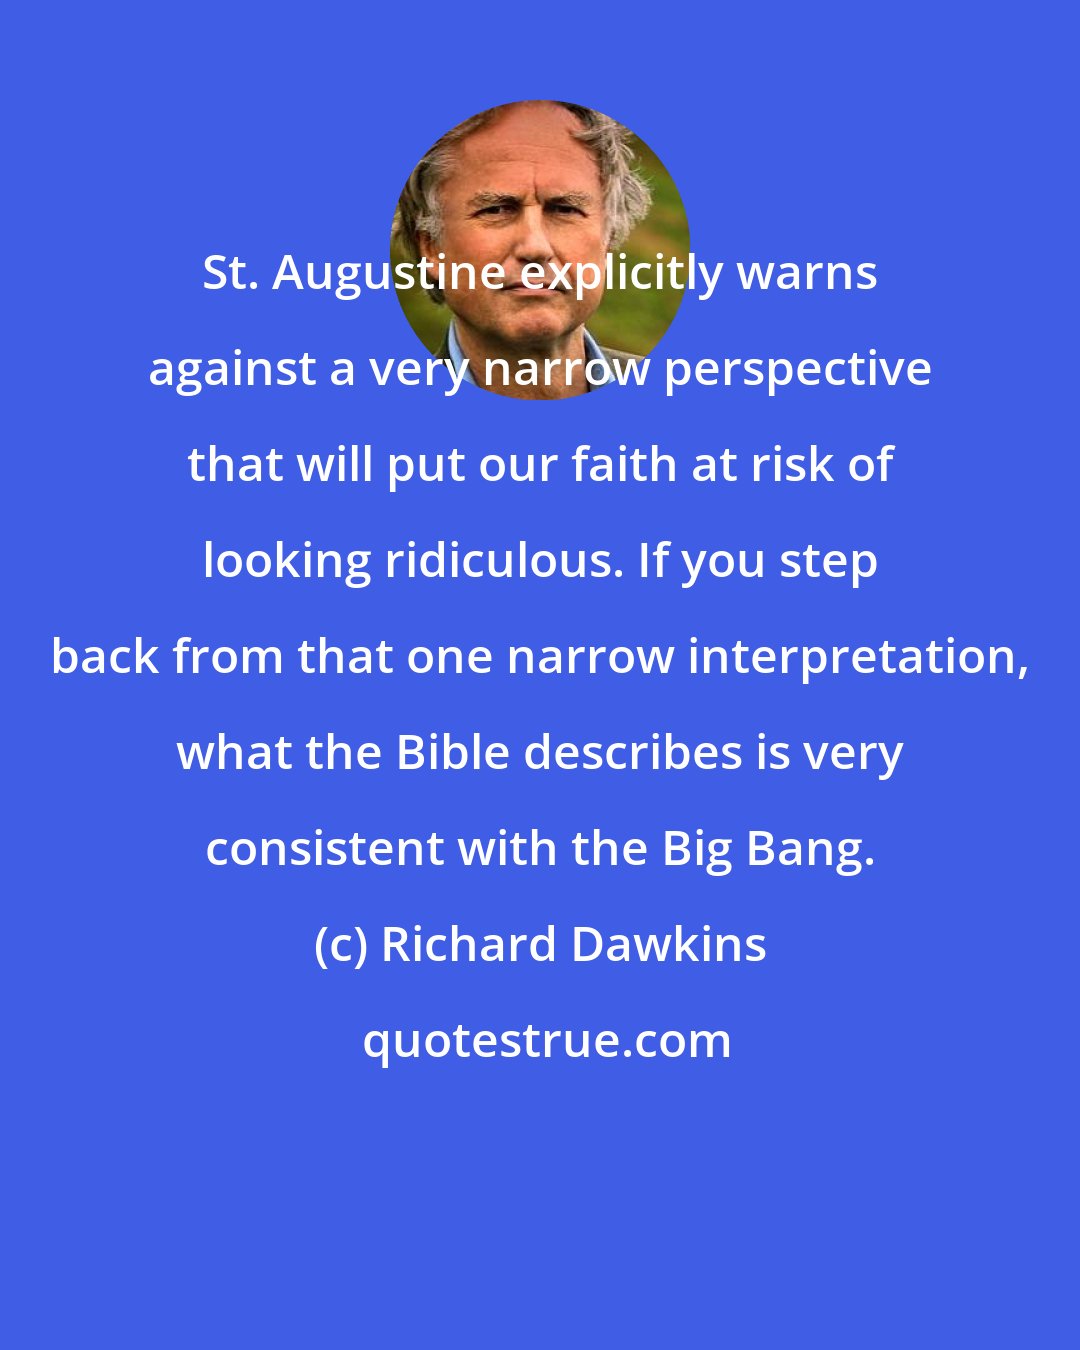 Richard Dawkins: St. Augustine explicitly warns against a very narrow perspective that will put our faith at risk of looking ridiculous. If you step back from that one narrow interpretation, what the Bible describes is very consistent with the Big Bang.